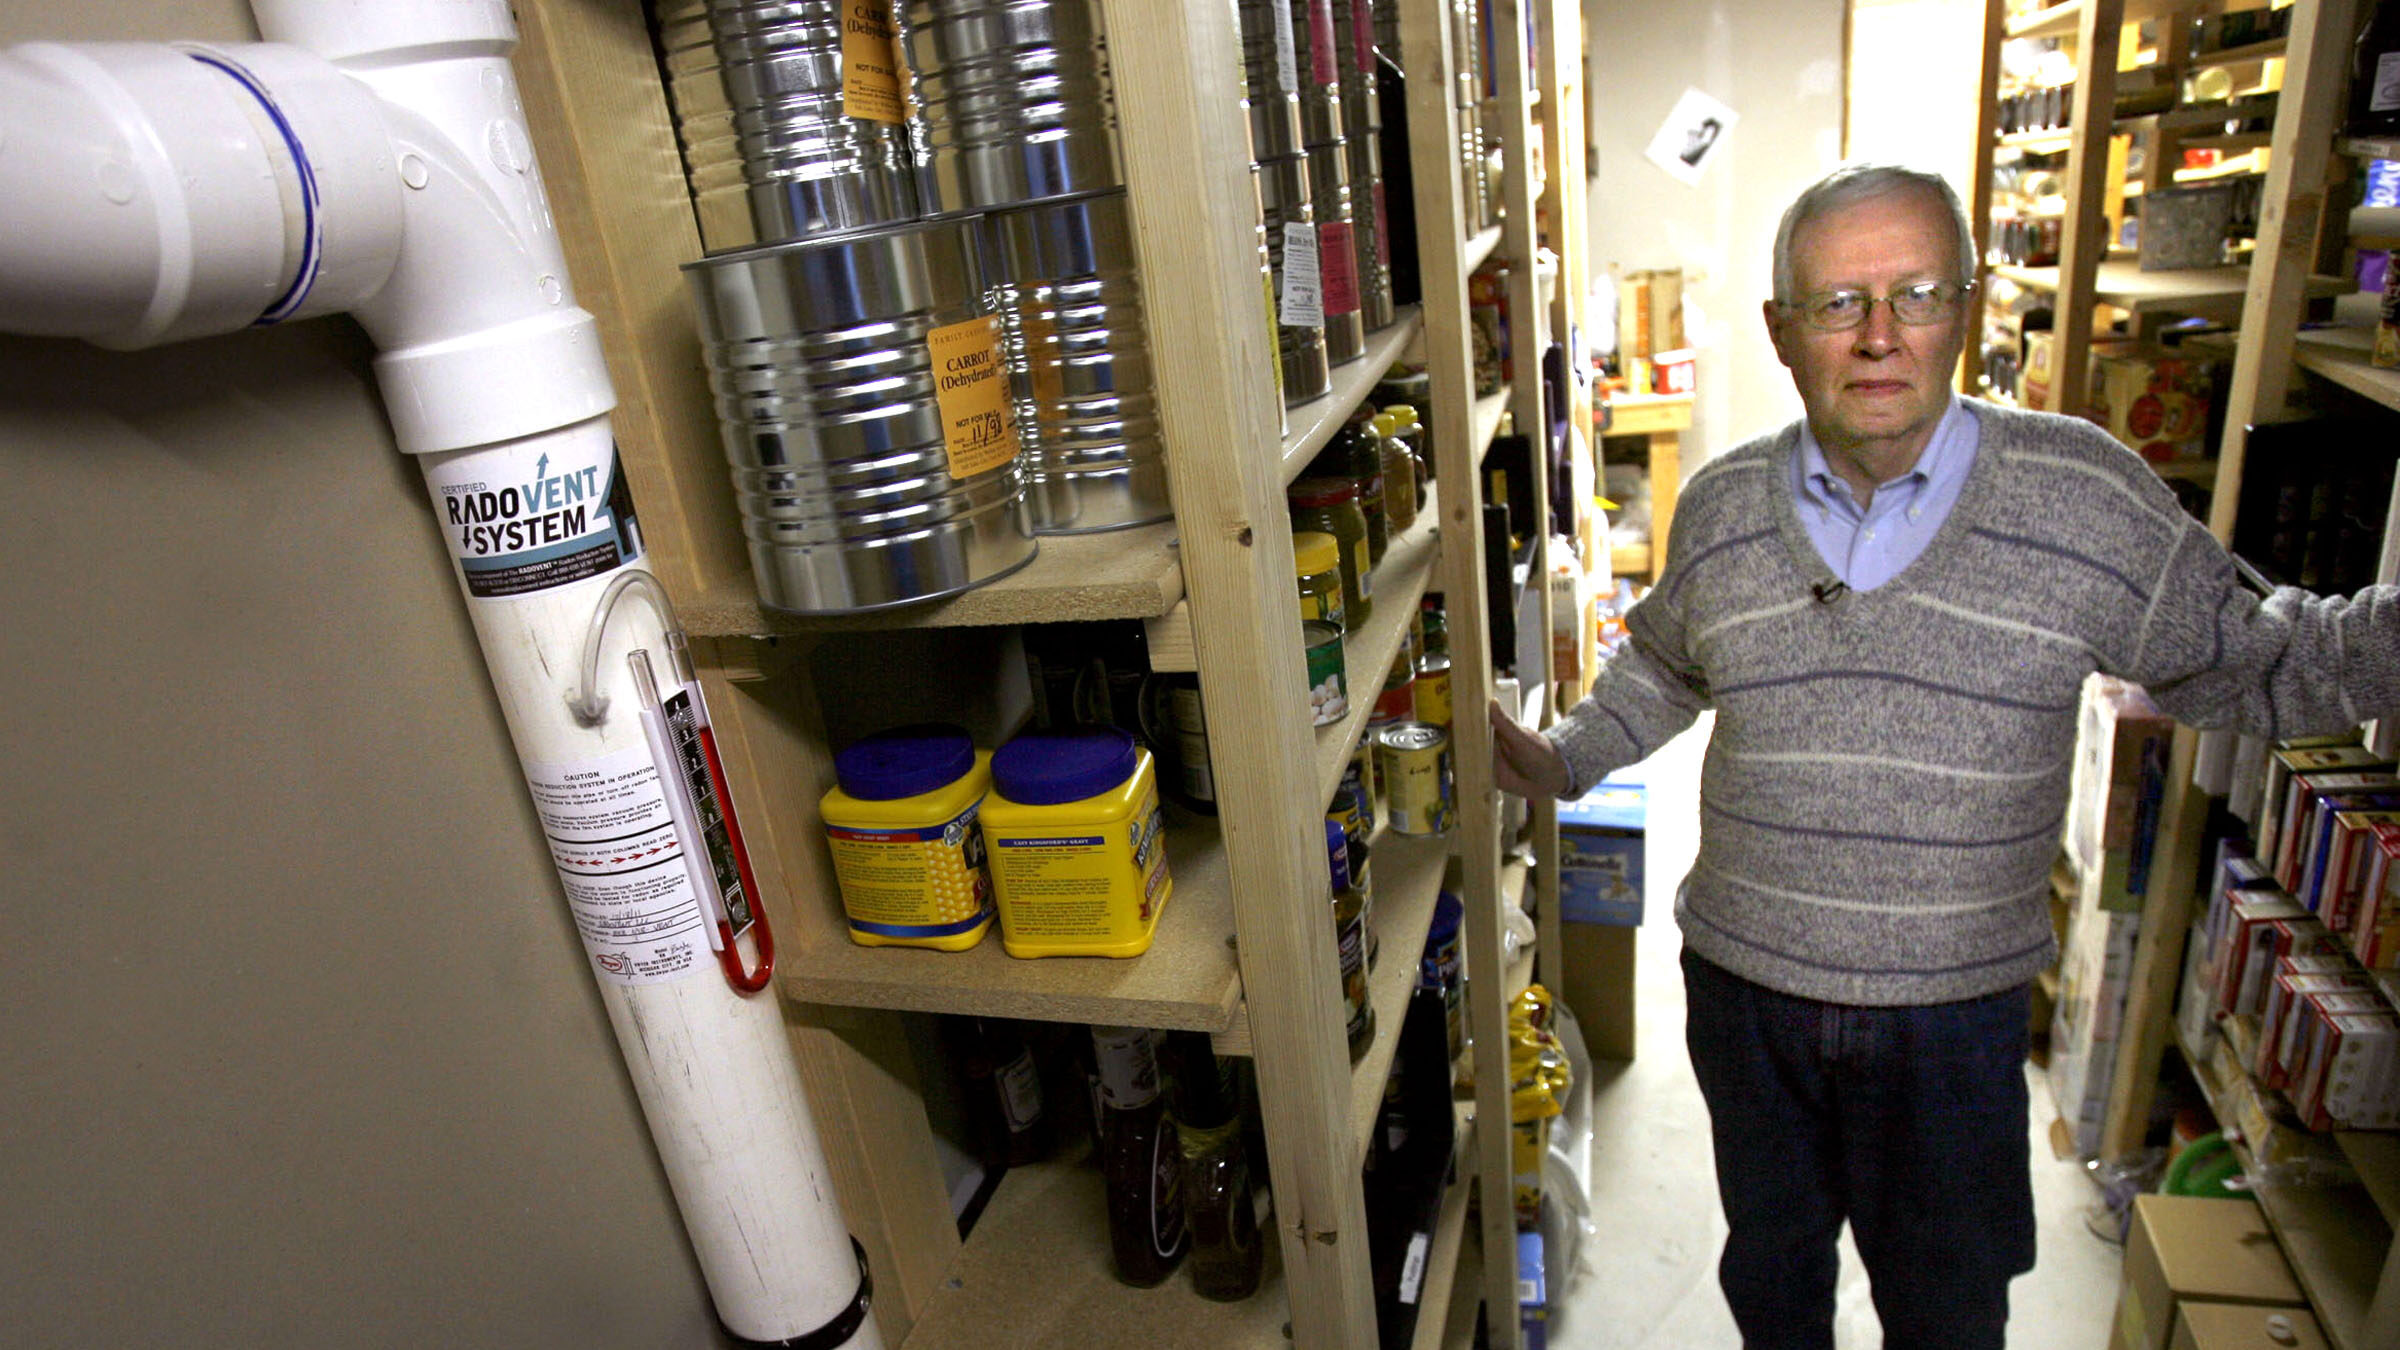 In a basement stocked with emergency food supplies Charlie McQuinn, 71, shows the radon mitigation ...